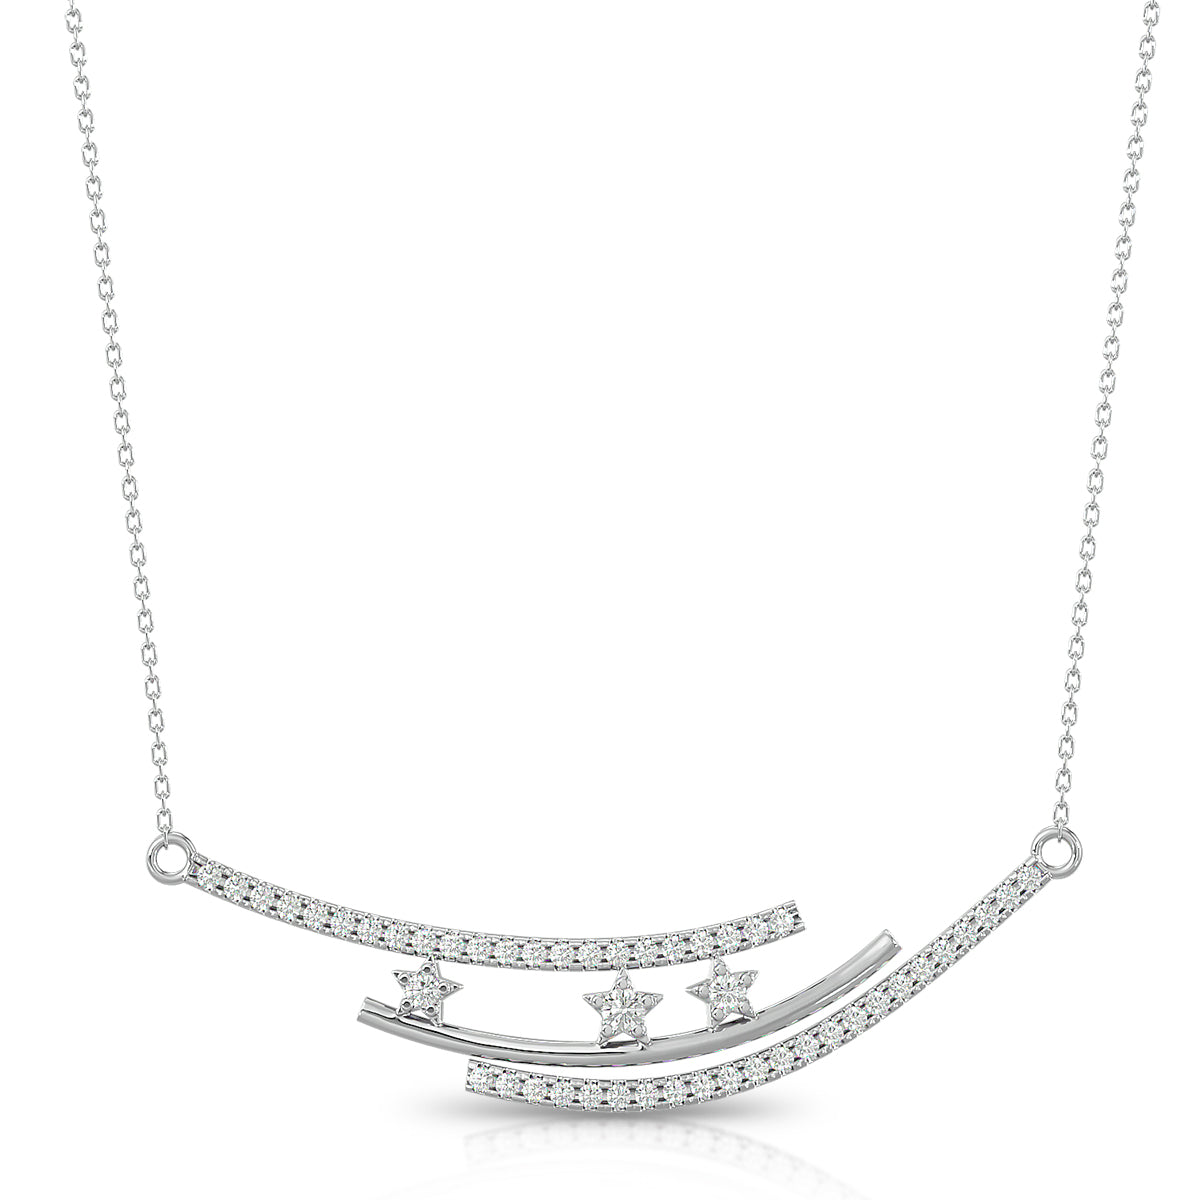 Energy Necklace 18K White Gold With Diamonds